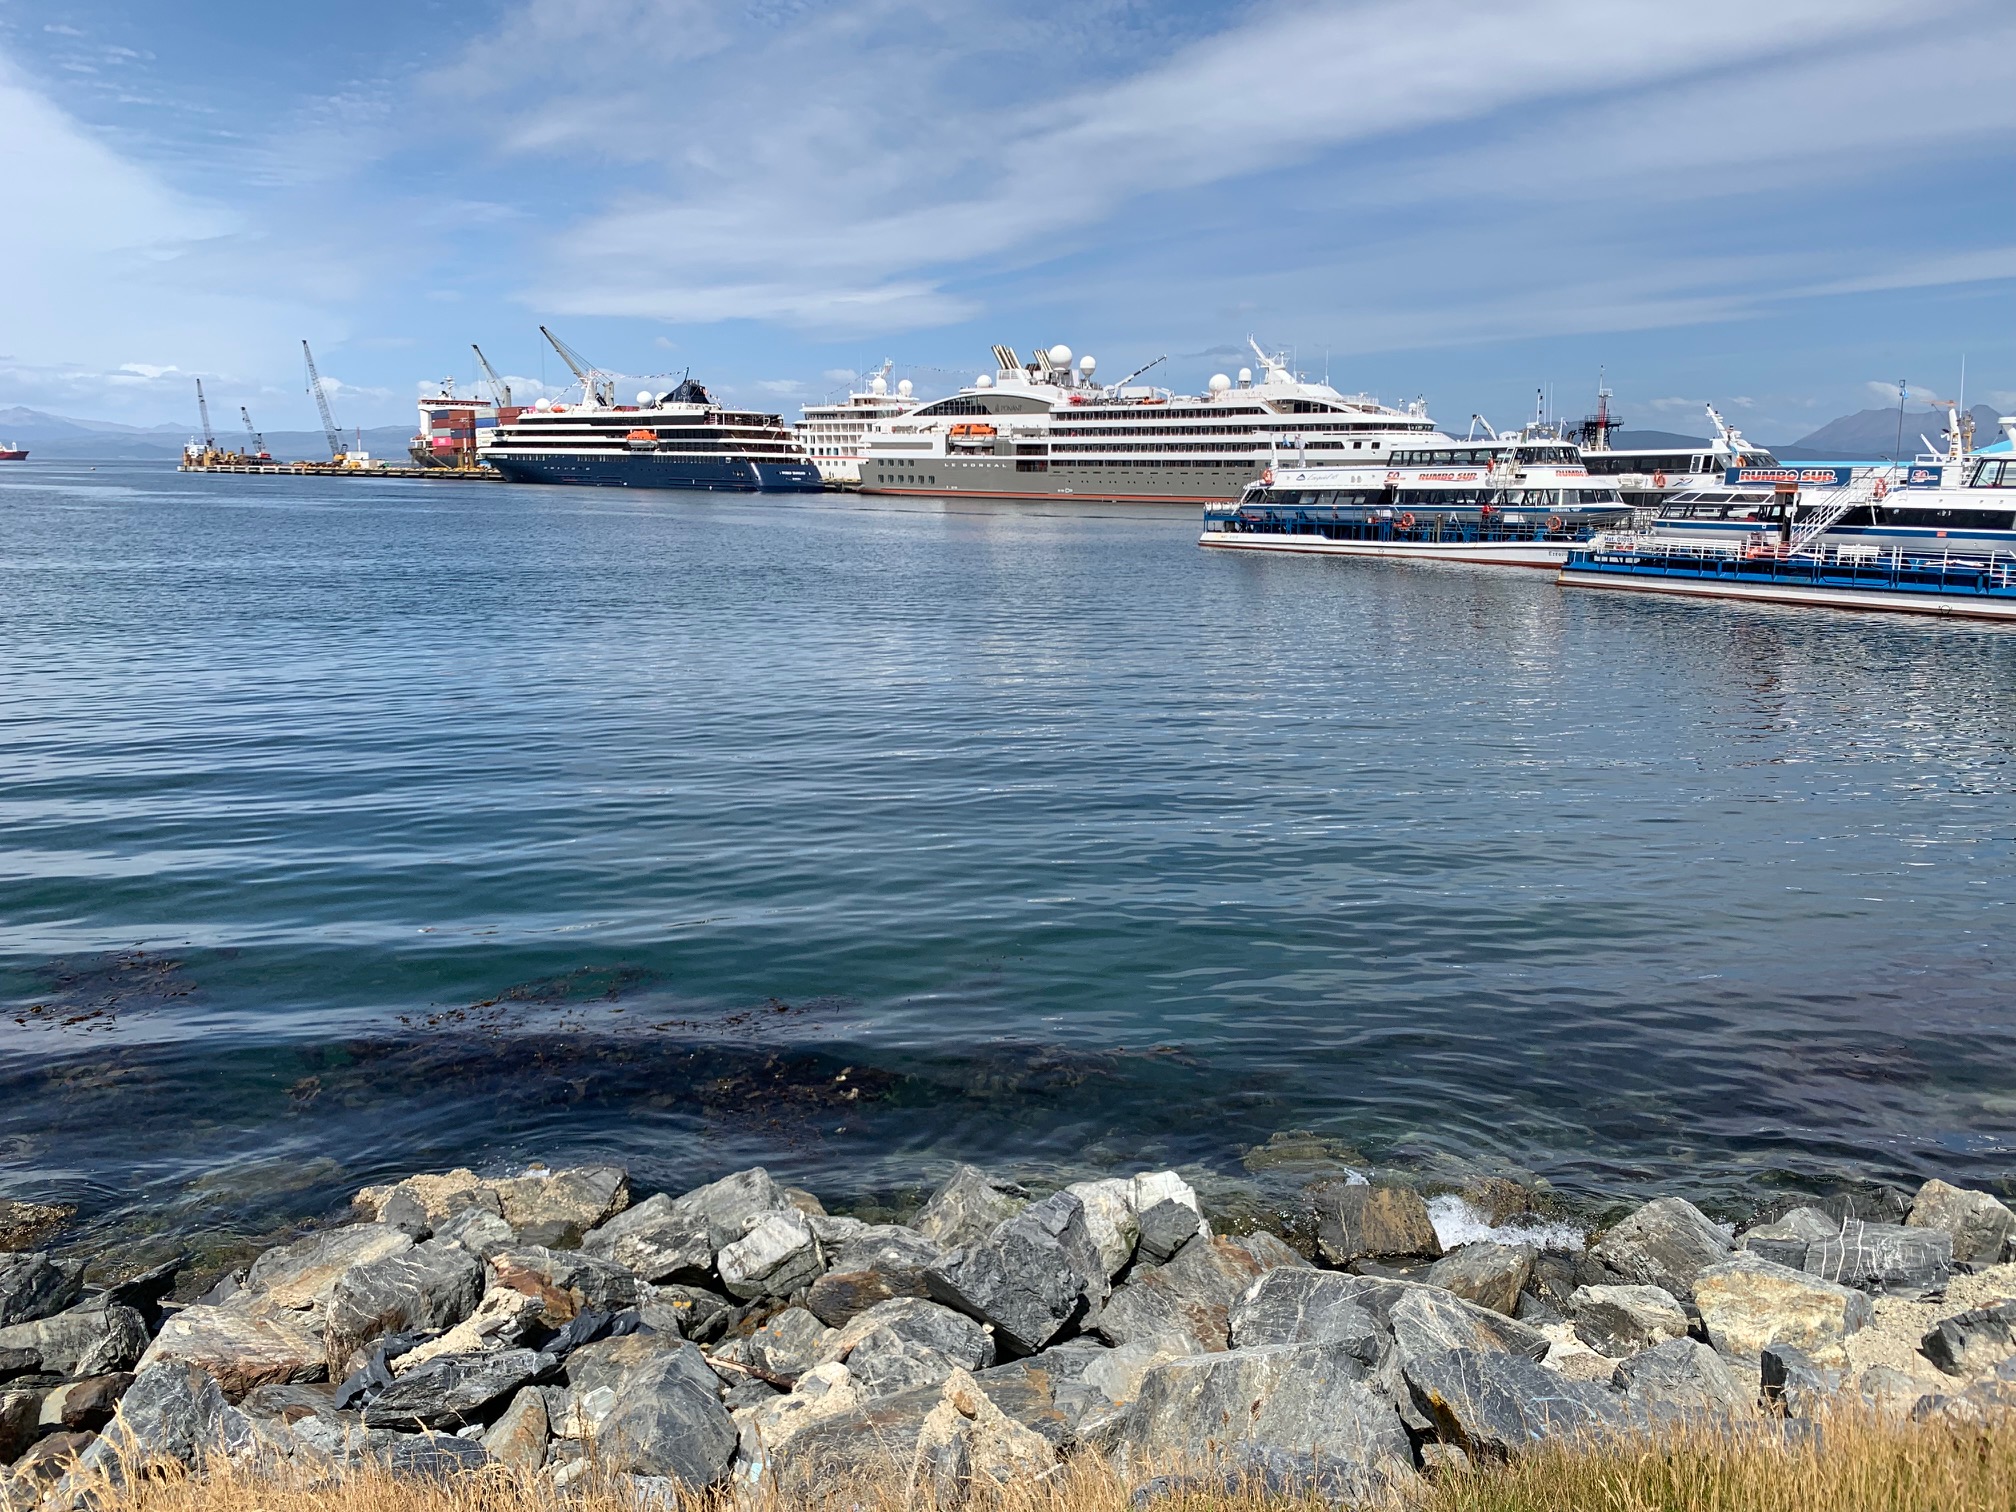 Vessels in Ushuaia, Argentina